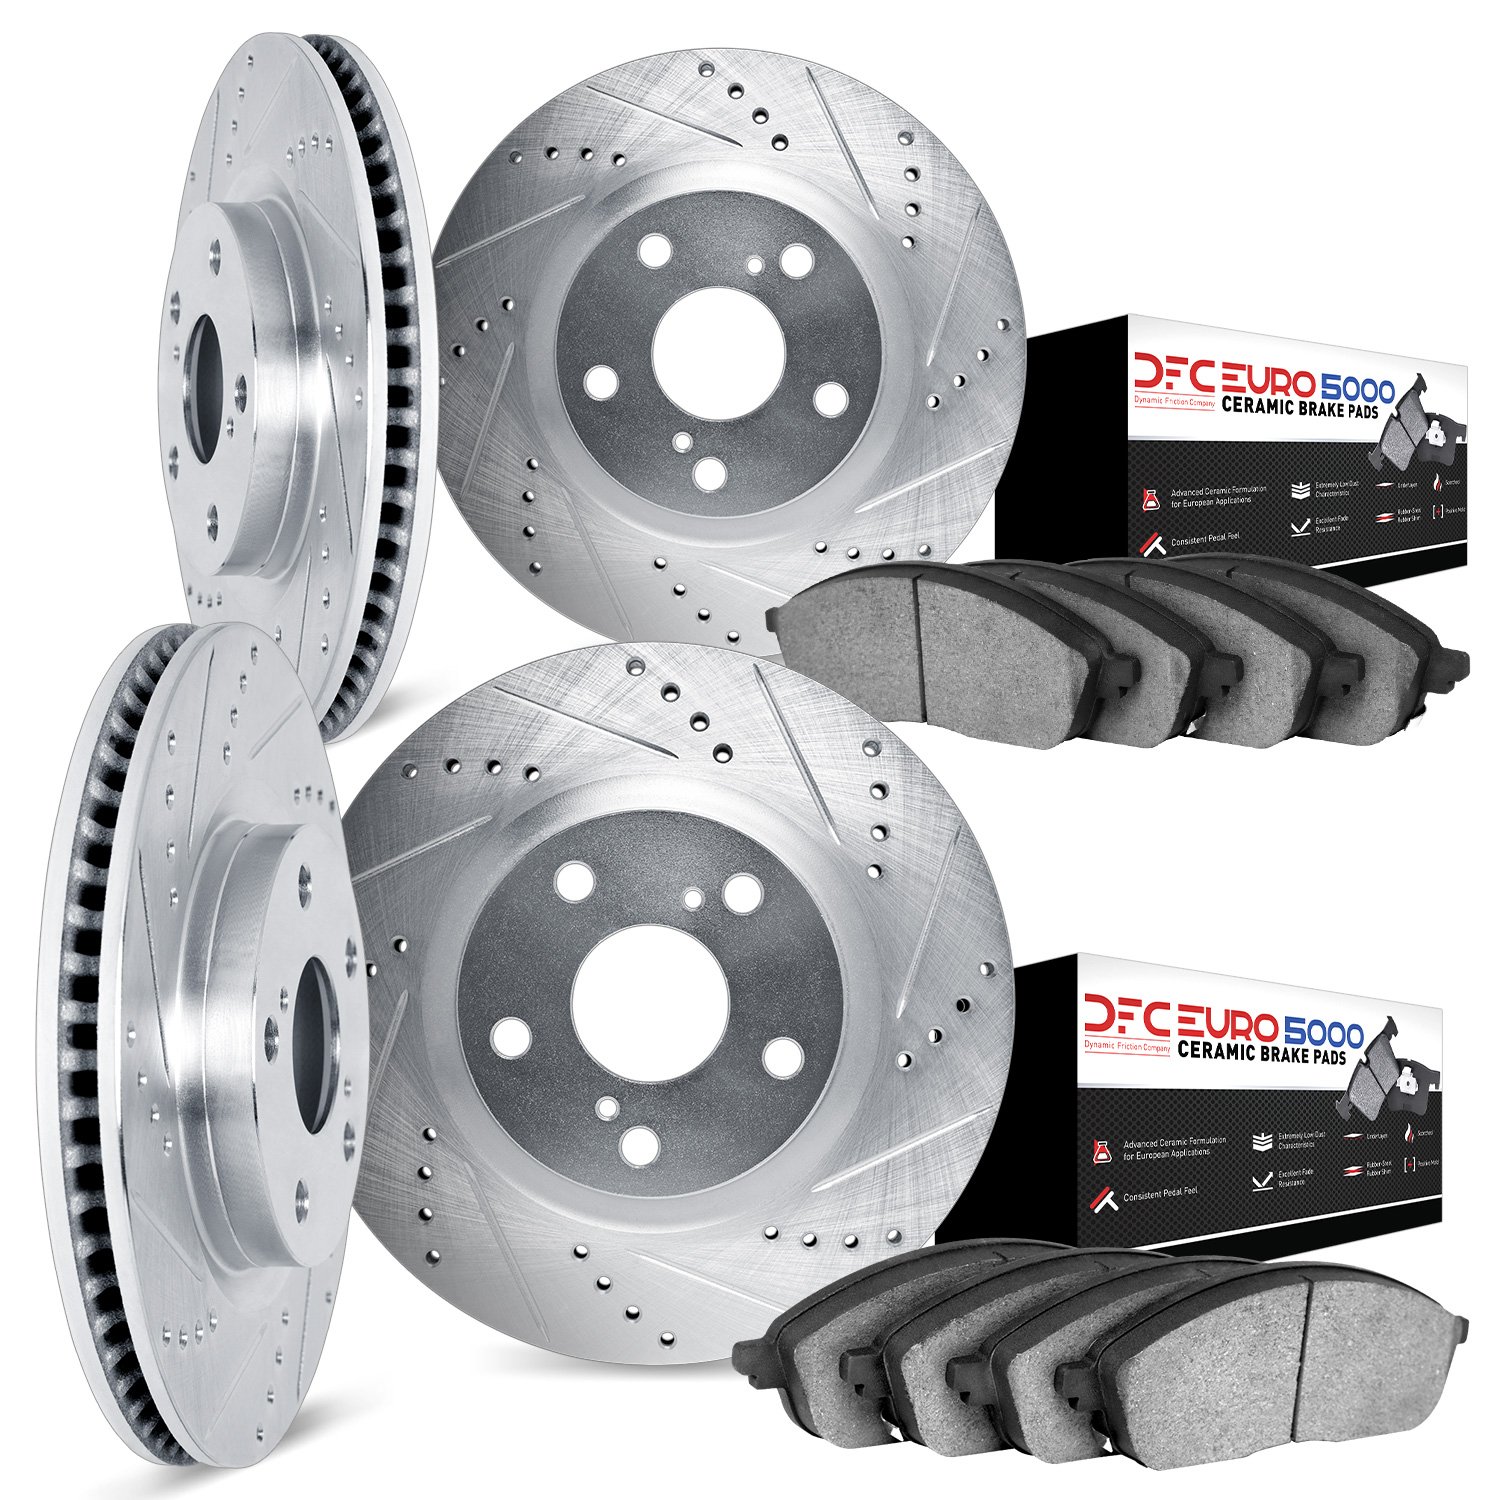 7604-27019 Drilled/Slotted Brake Rotors w/5000 Euro Ceramic Brake Pads Kit [Silver], 2017-2019 Volvo, Position: Front and Rear